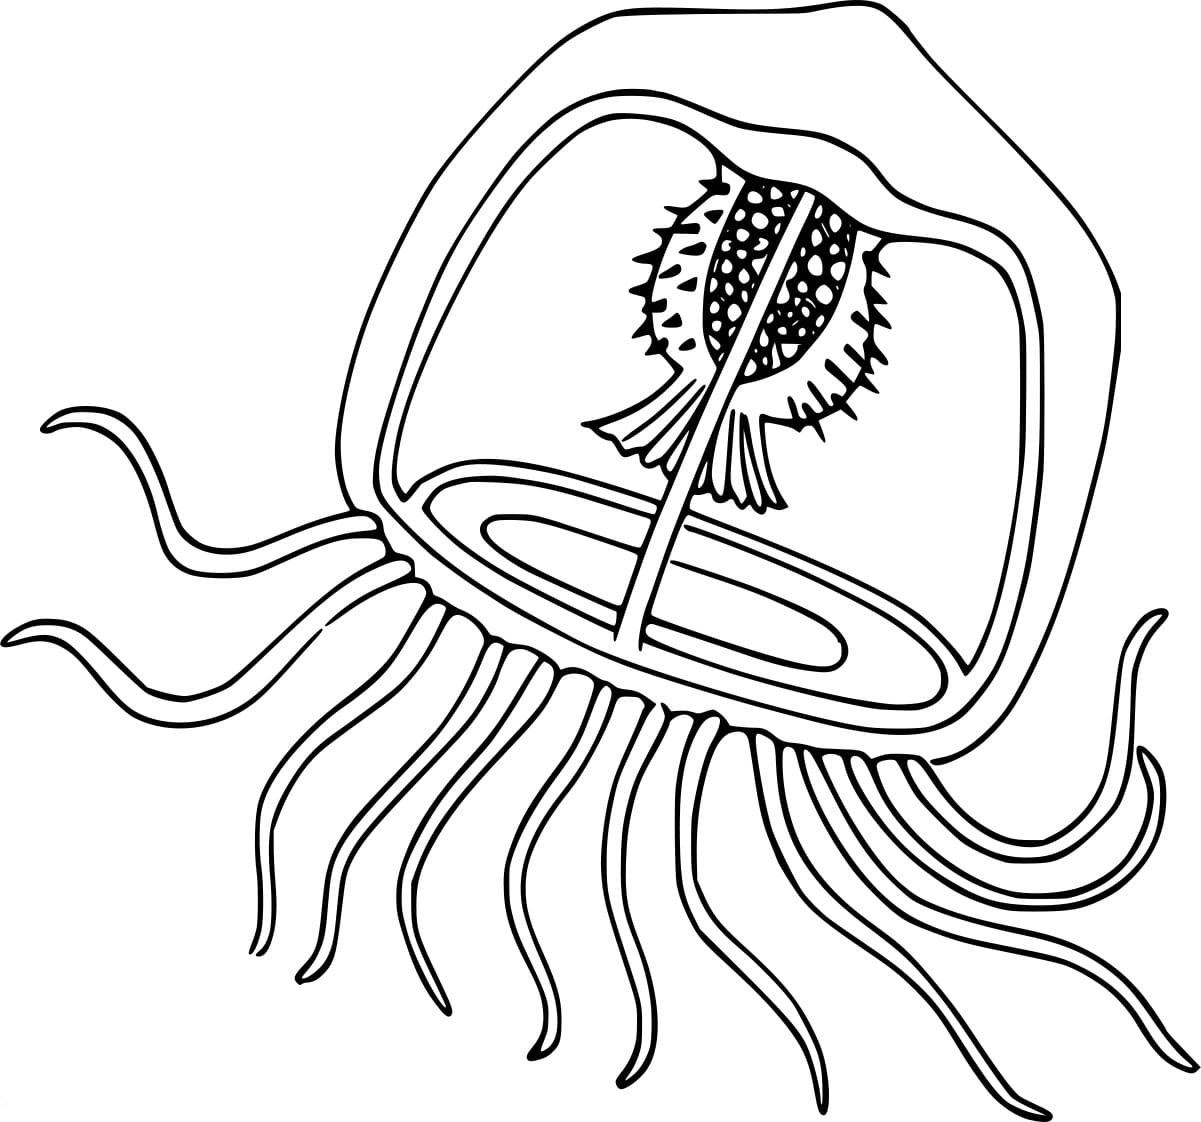 Box Jellyfish Coloring Page